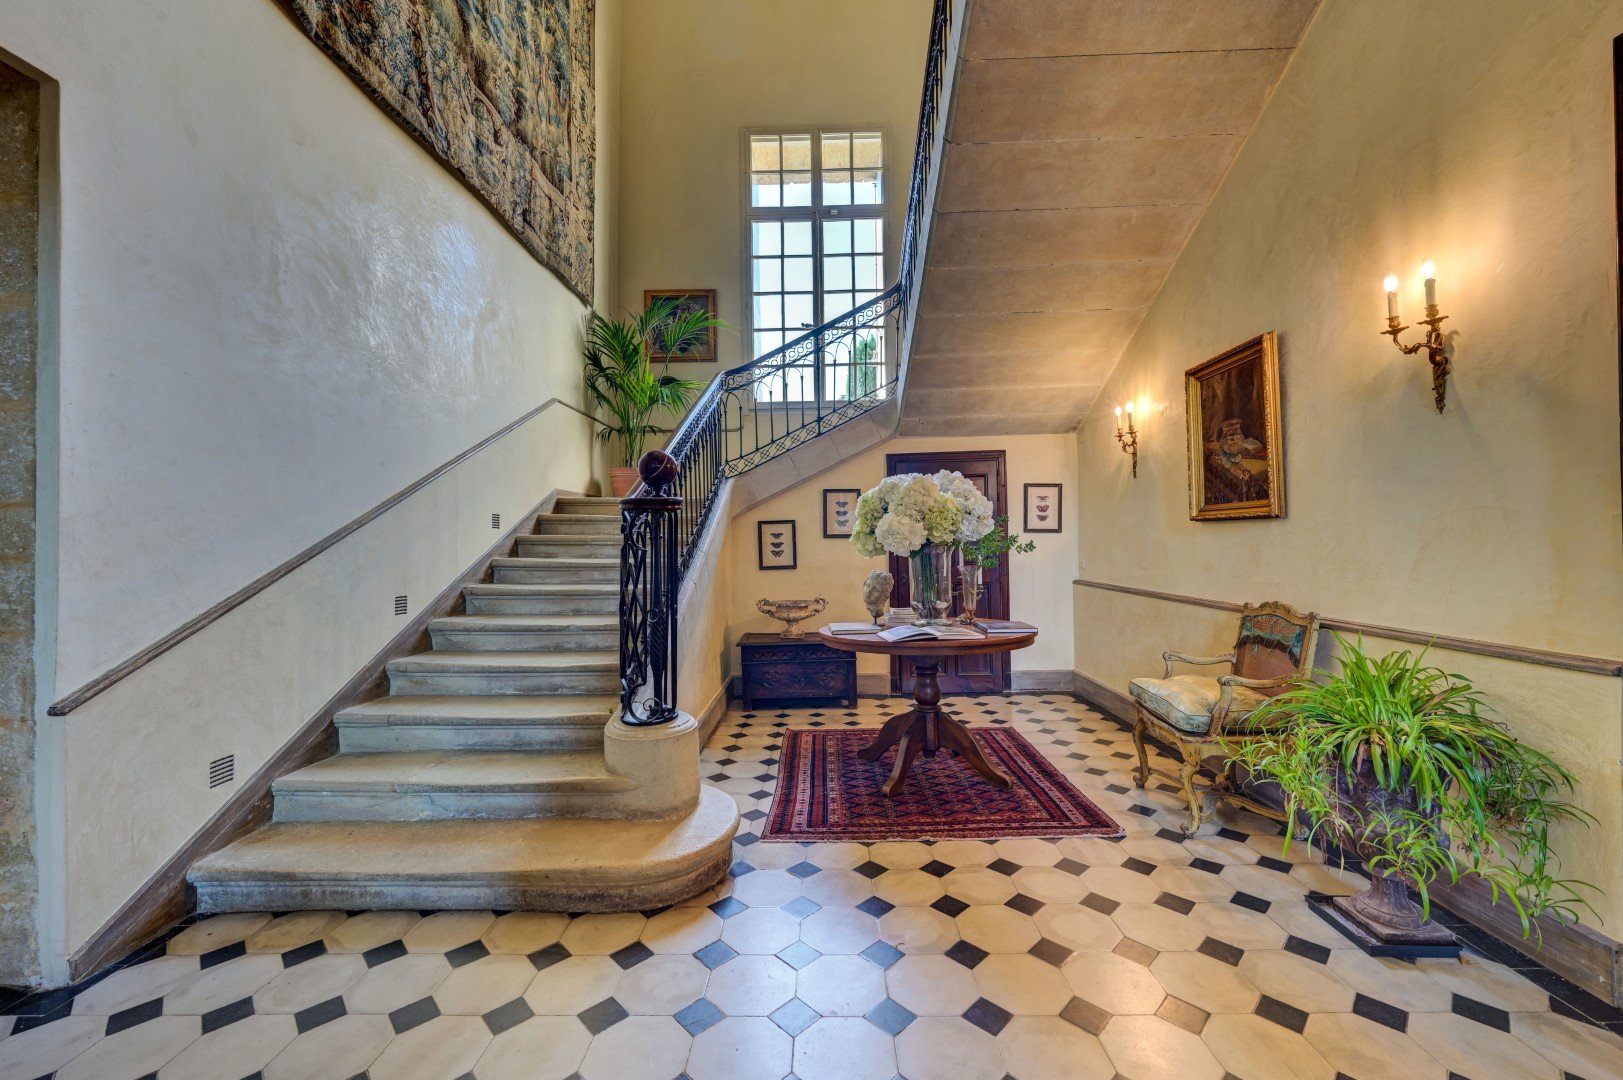 Luxury chateau for rent in the South of France at Uzes